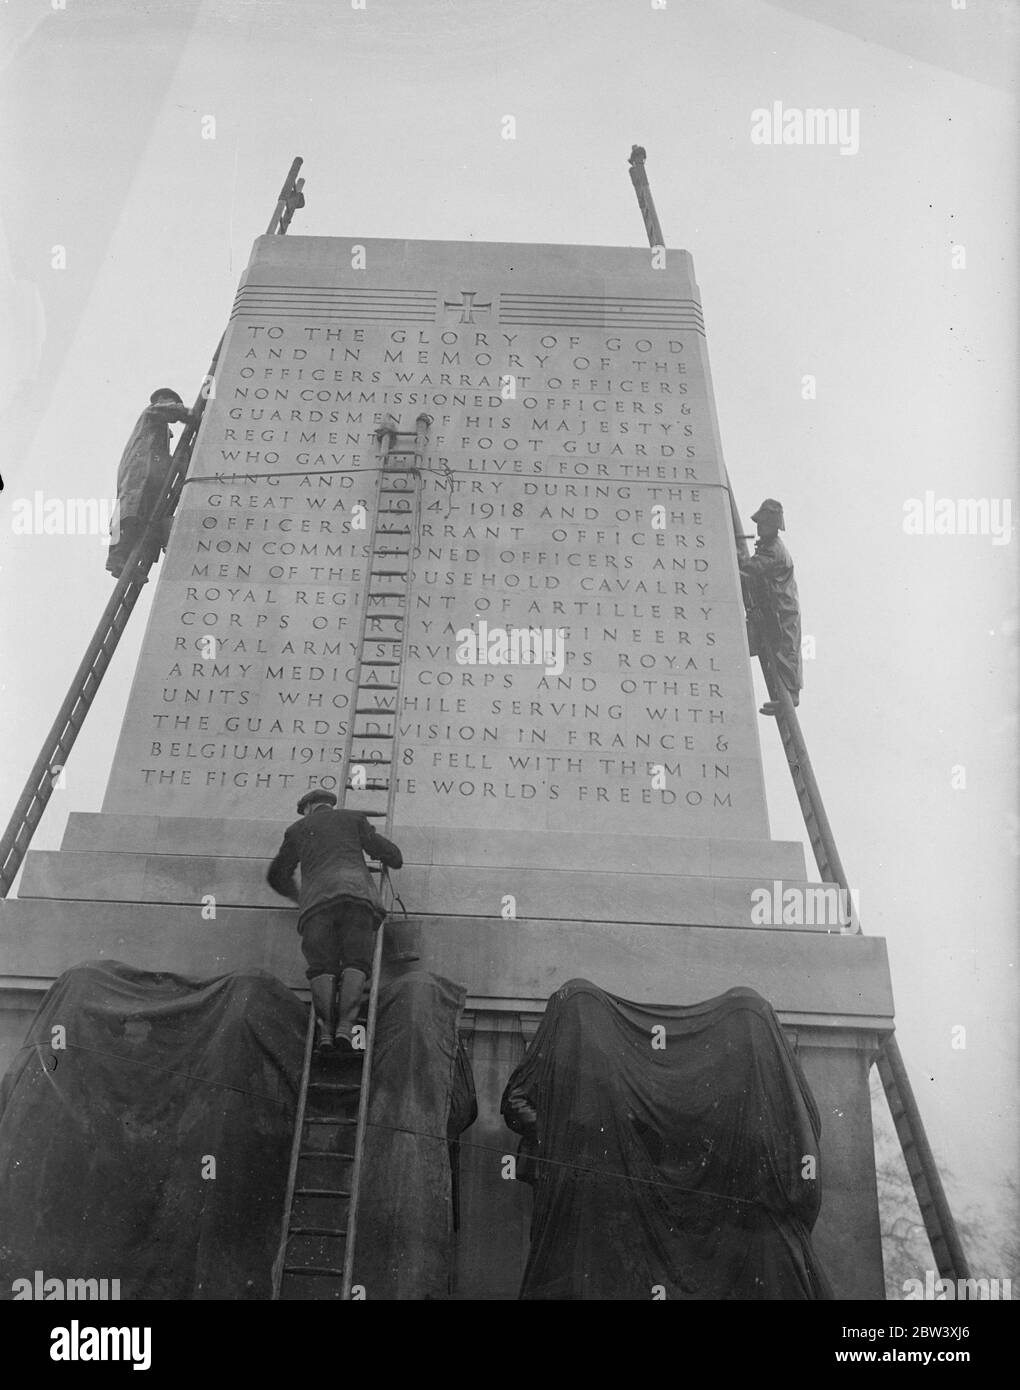 The impressive, but simple memorial erected to the memory of Guardsman who fell in the Great War is being cleaned in readiness for the Coronation. Photo shows: Cleaning the Guards Memorial on the Horse Guards Parade in readiness for the Coronation. 2 April 1937 Stock Photo